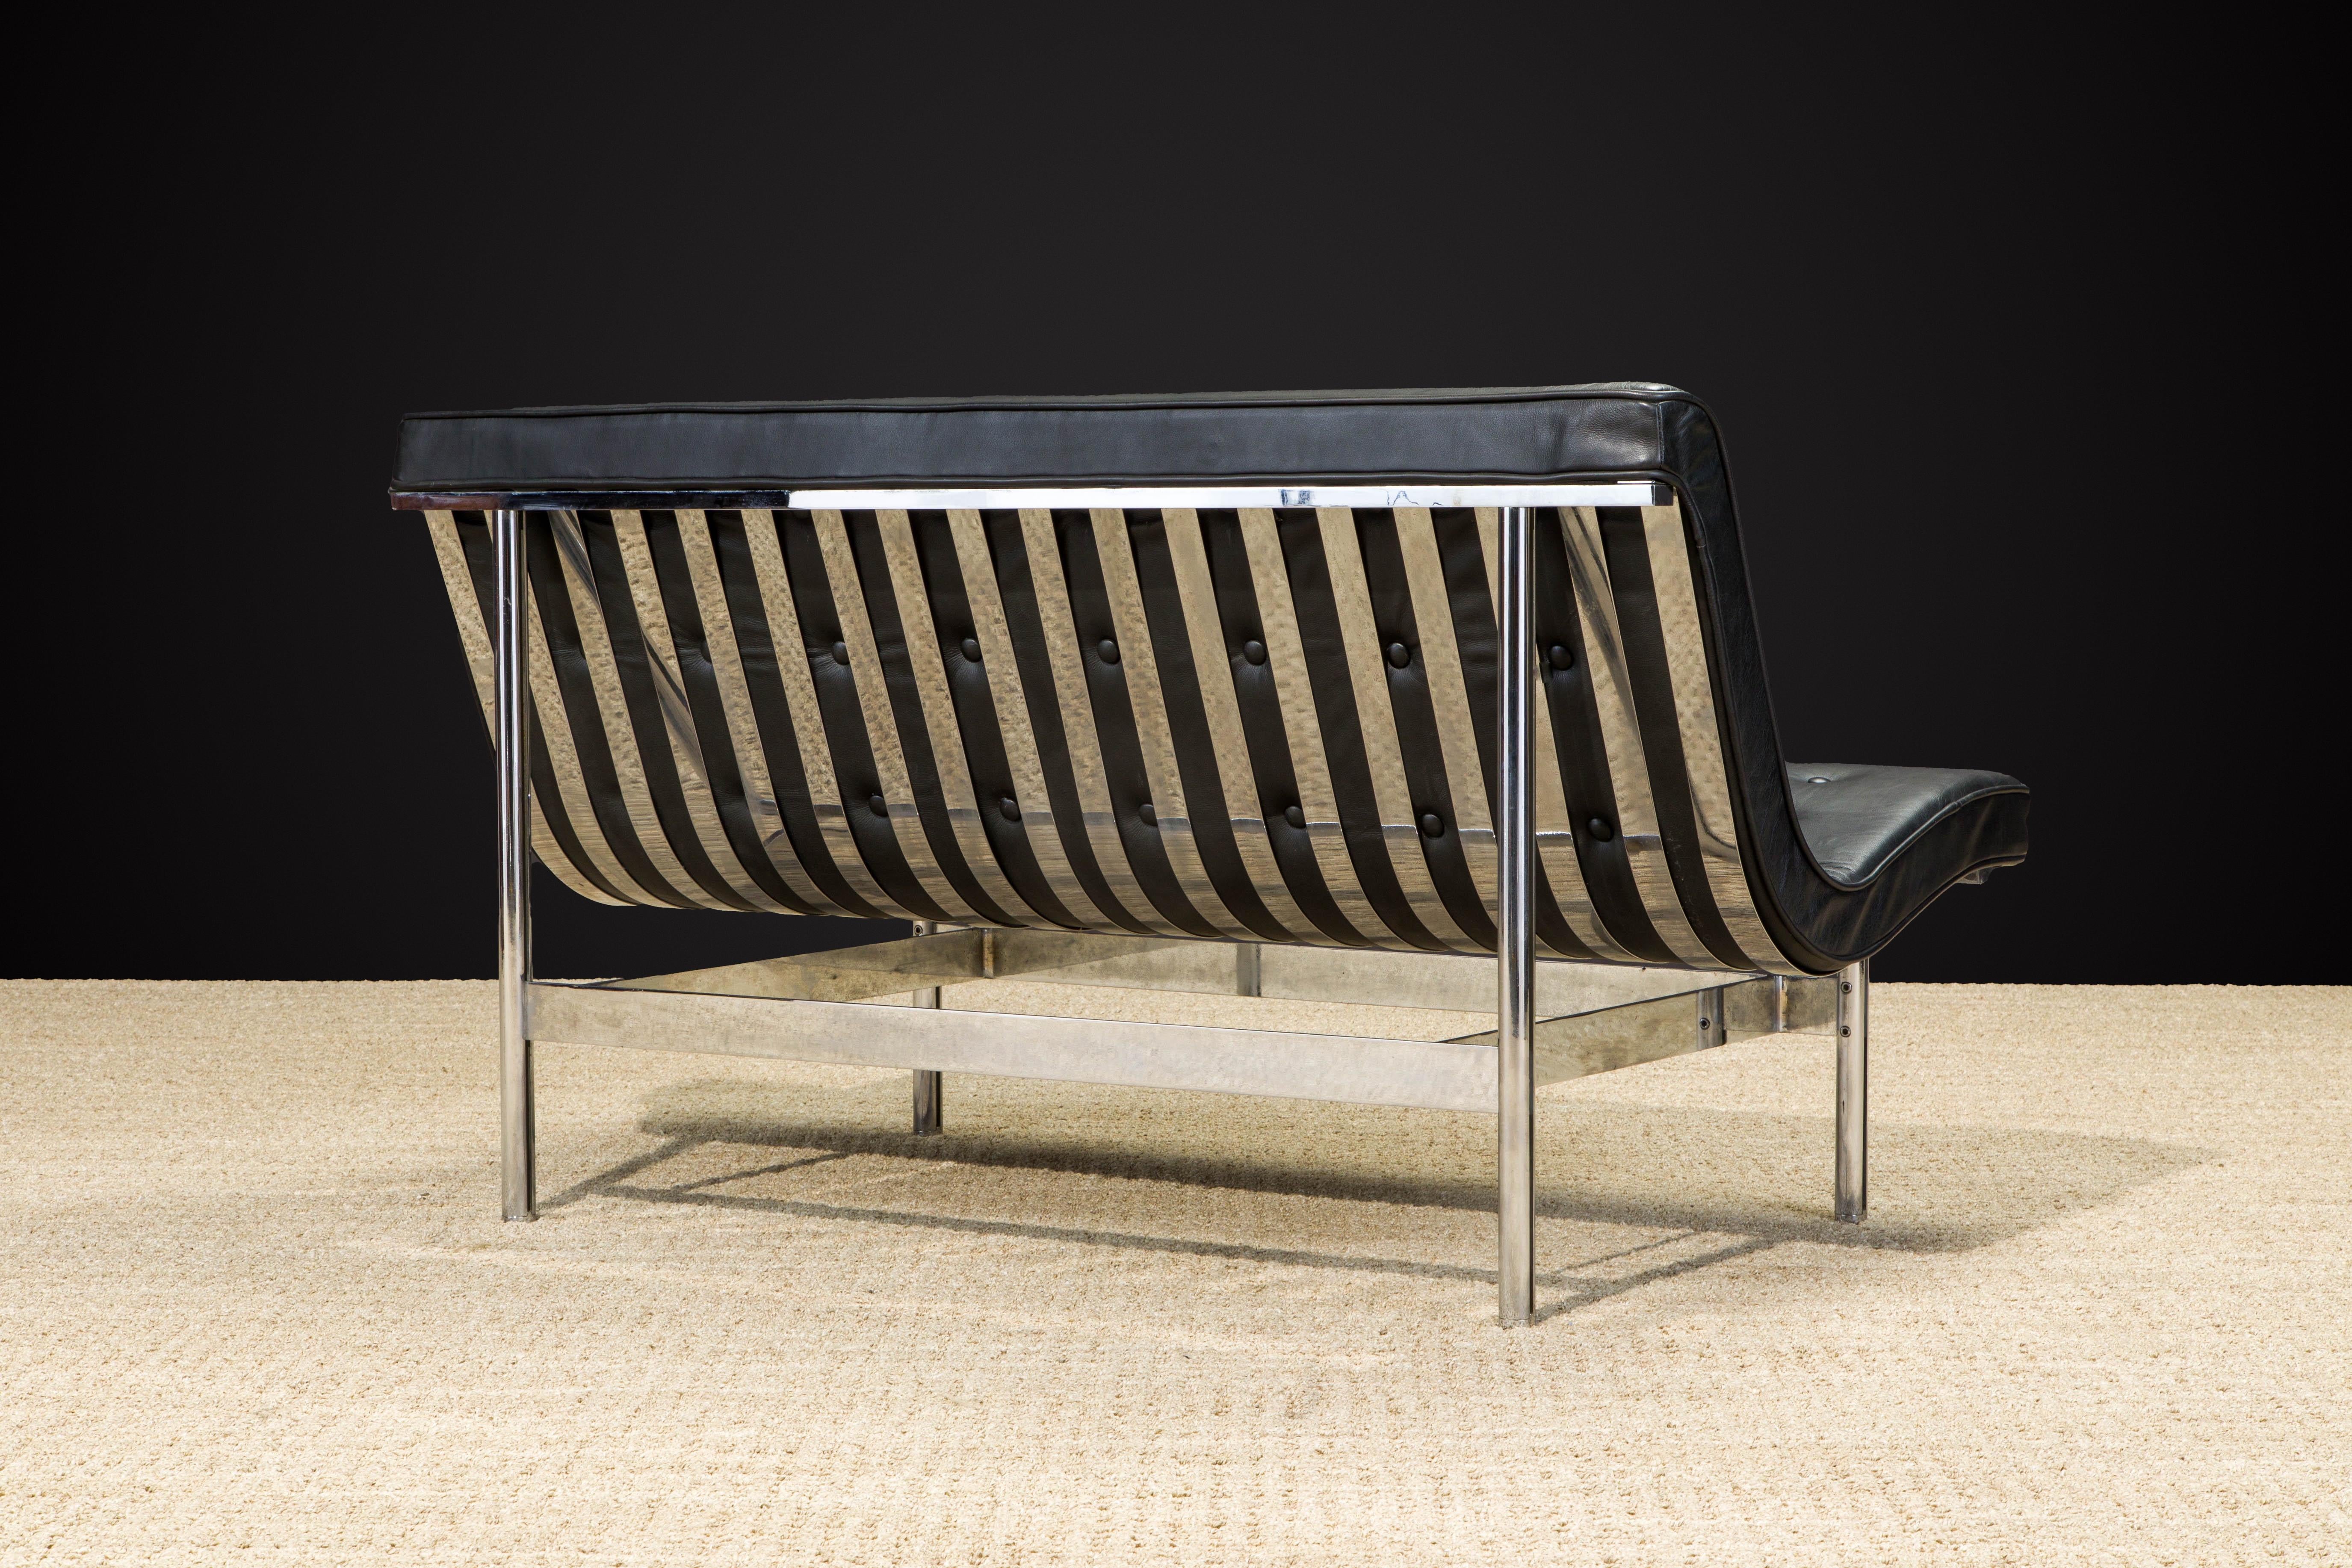 Steel 'New York' Settee by Katavolos, Littell and Kelley for Laverne Intl, c. 1952 For Sale